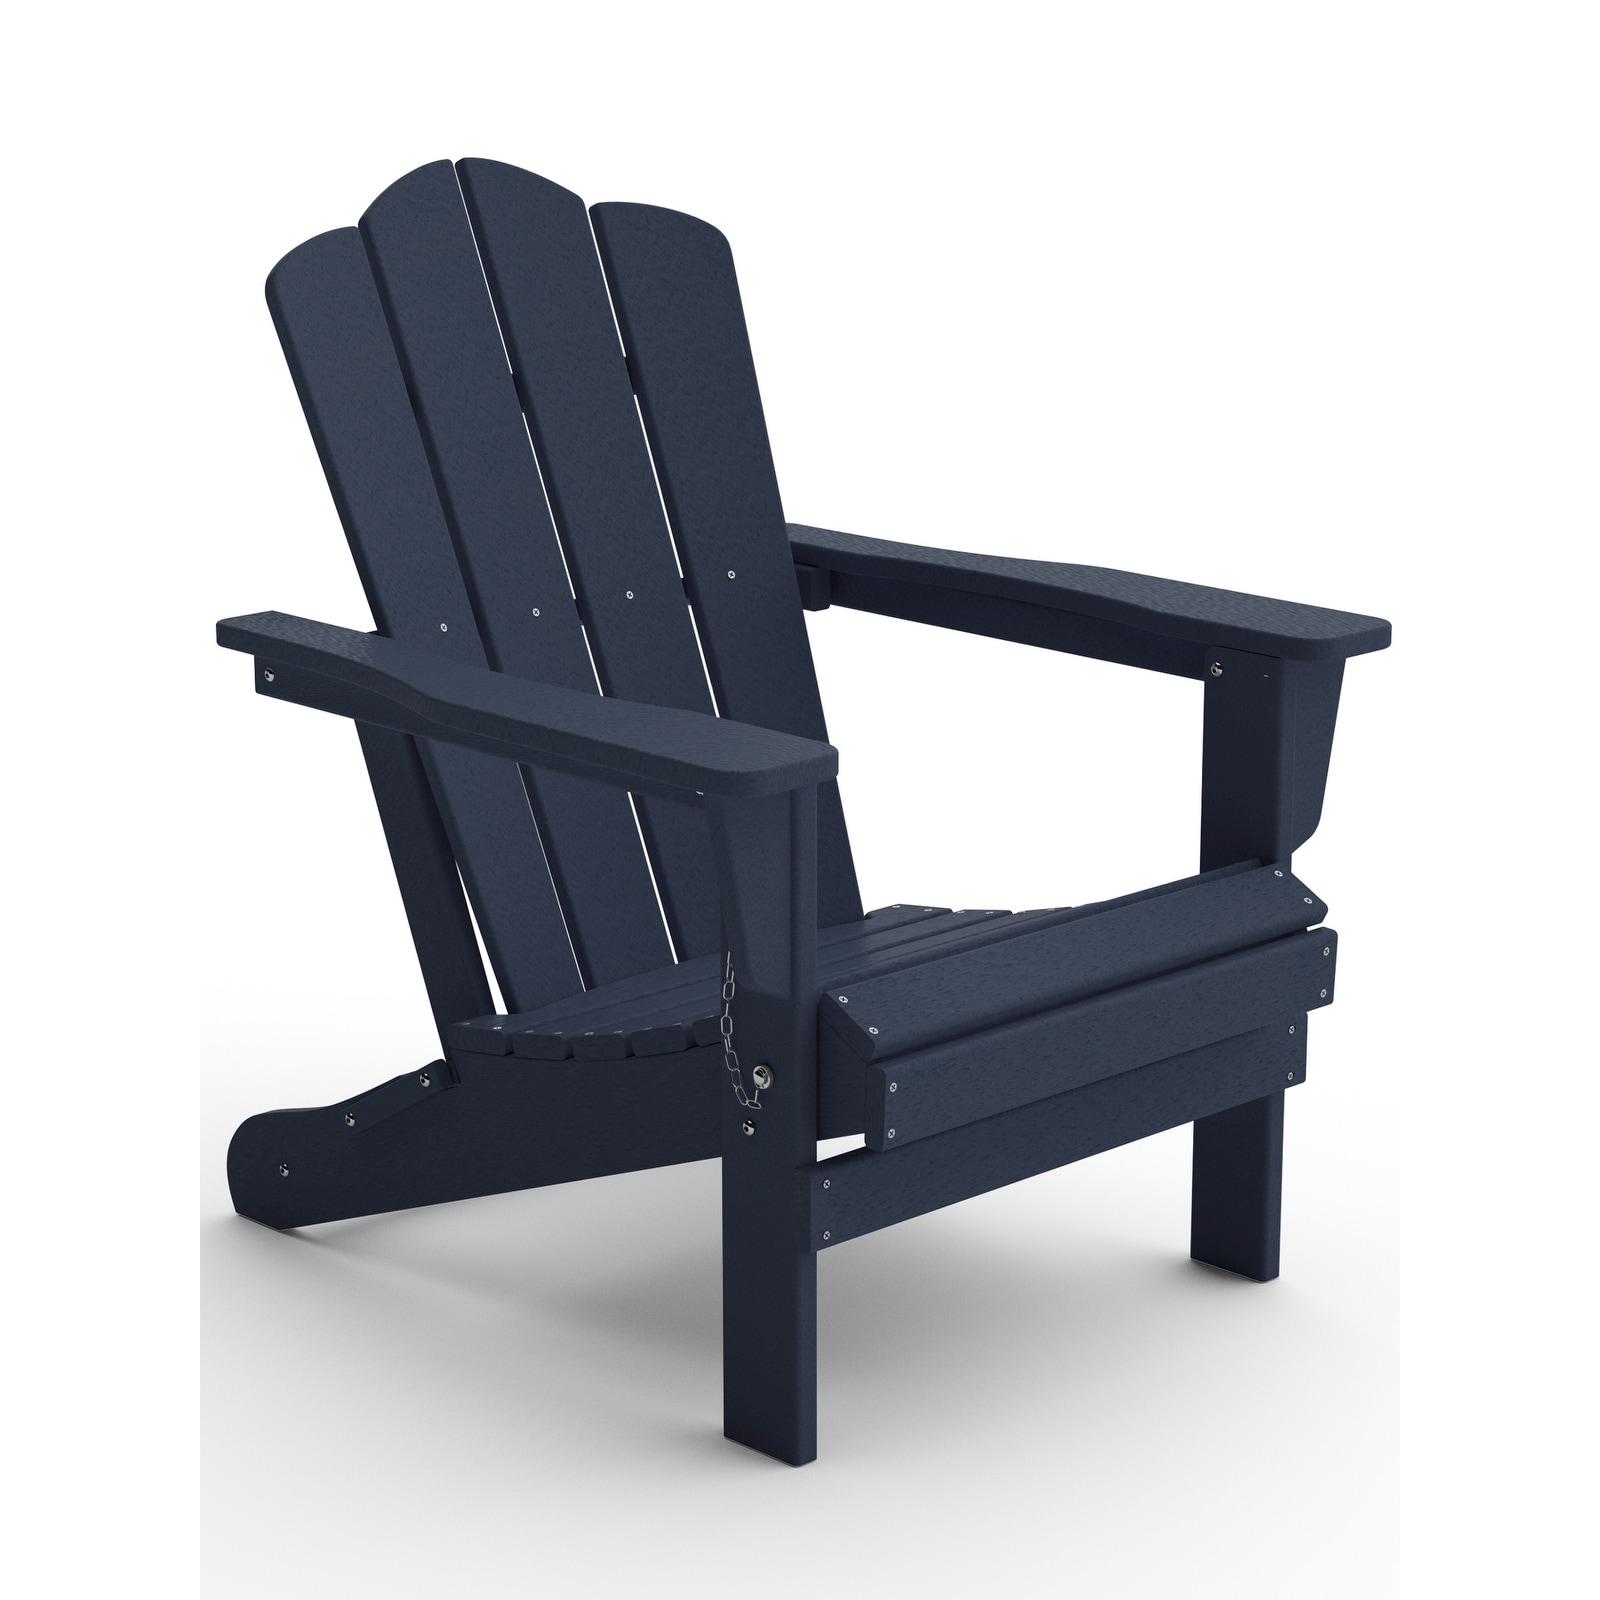 Outdoor Hdpe Folding Classic Adirondack Chair All-weather